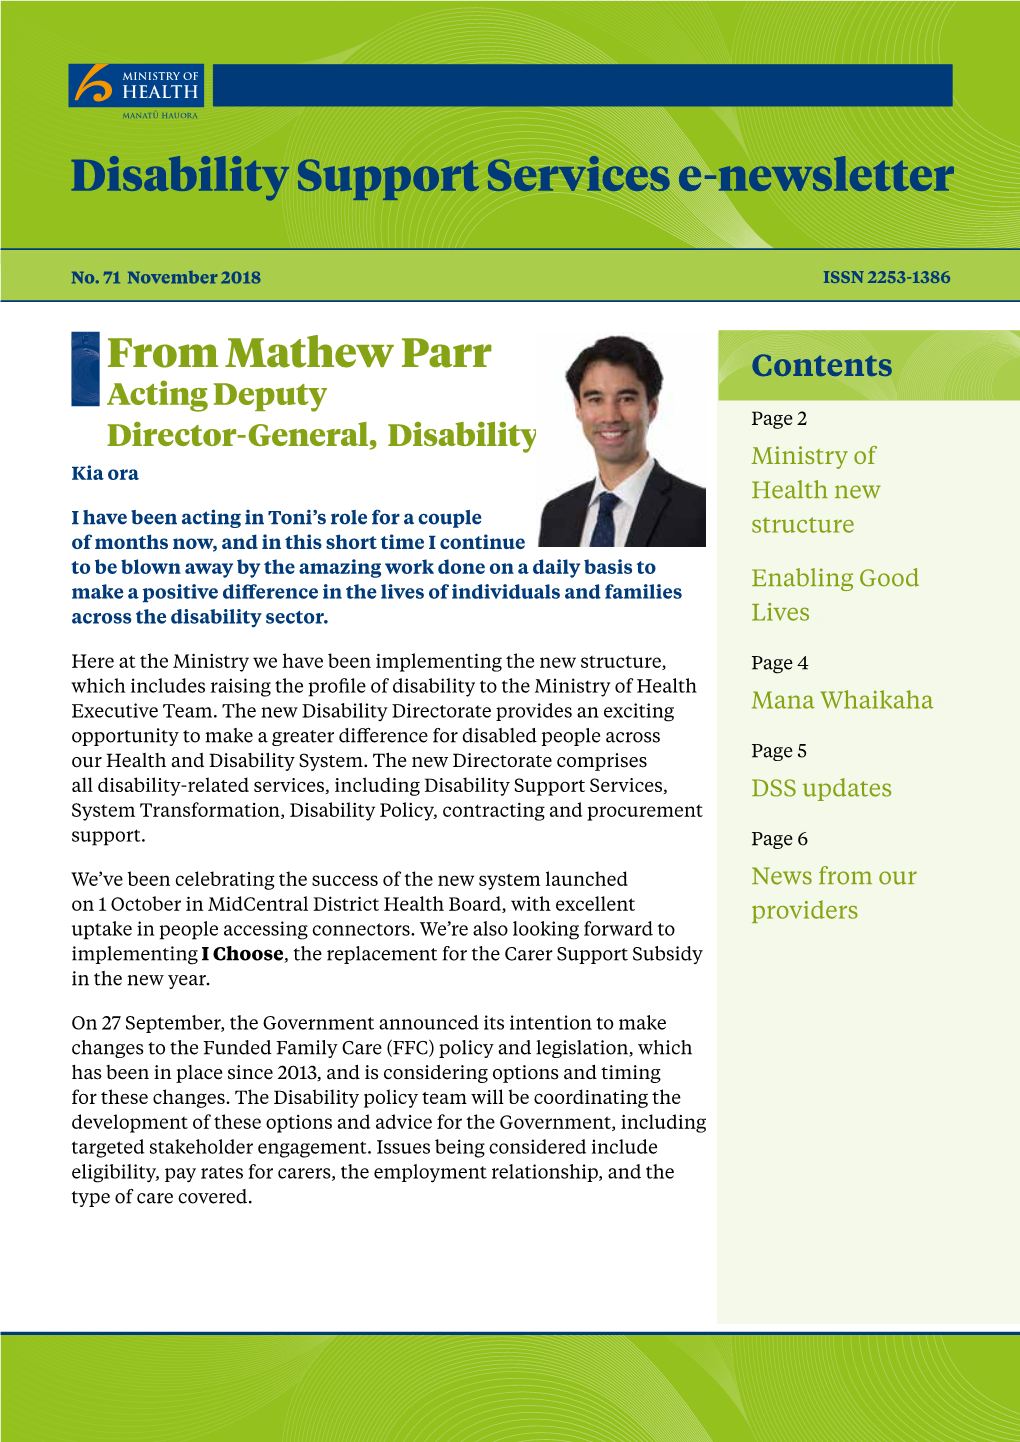 Disability Support Services E-Newsletter